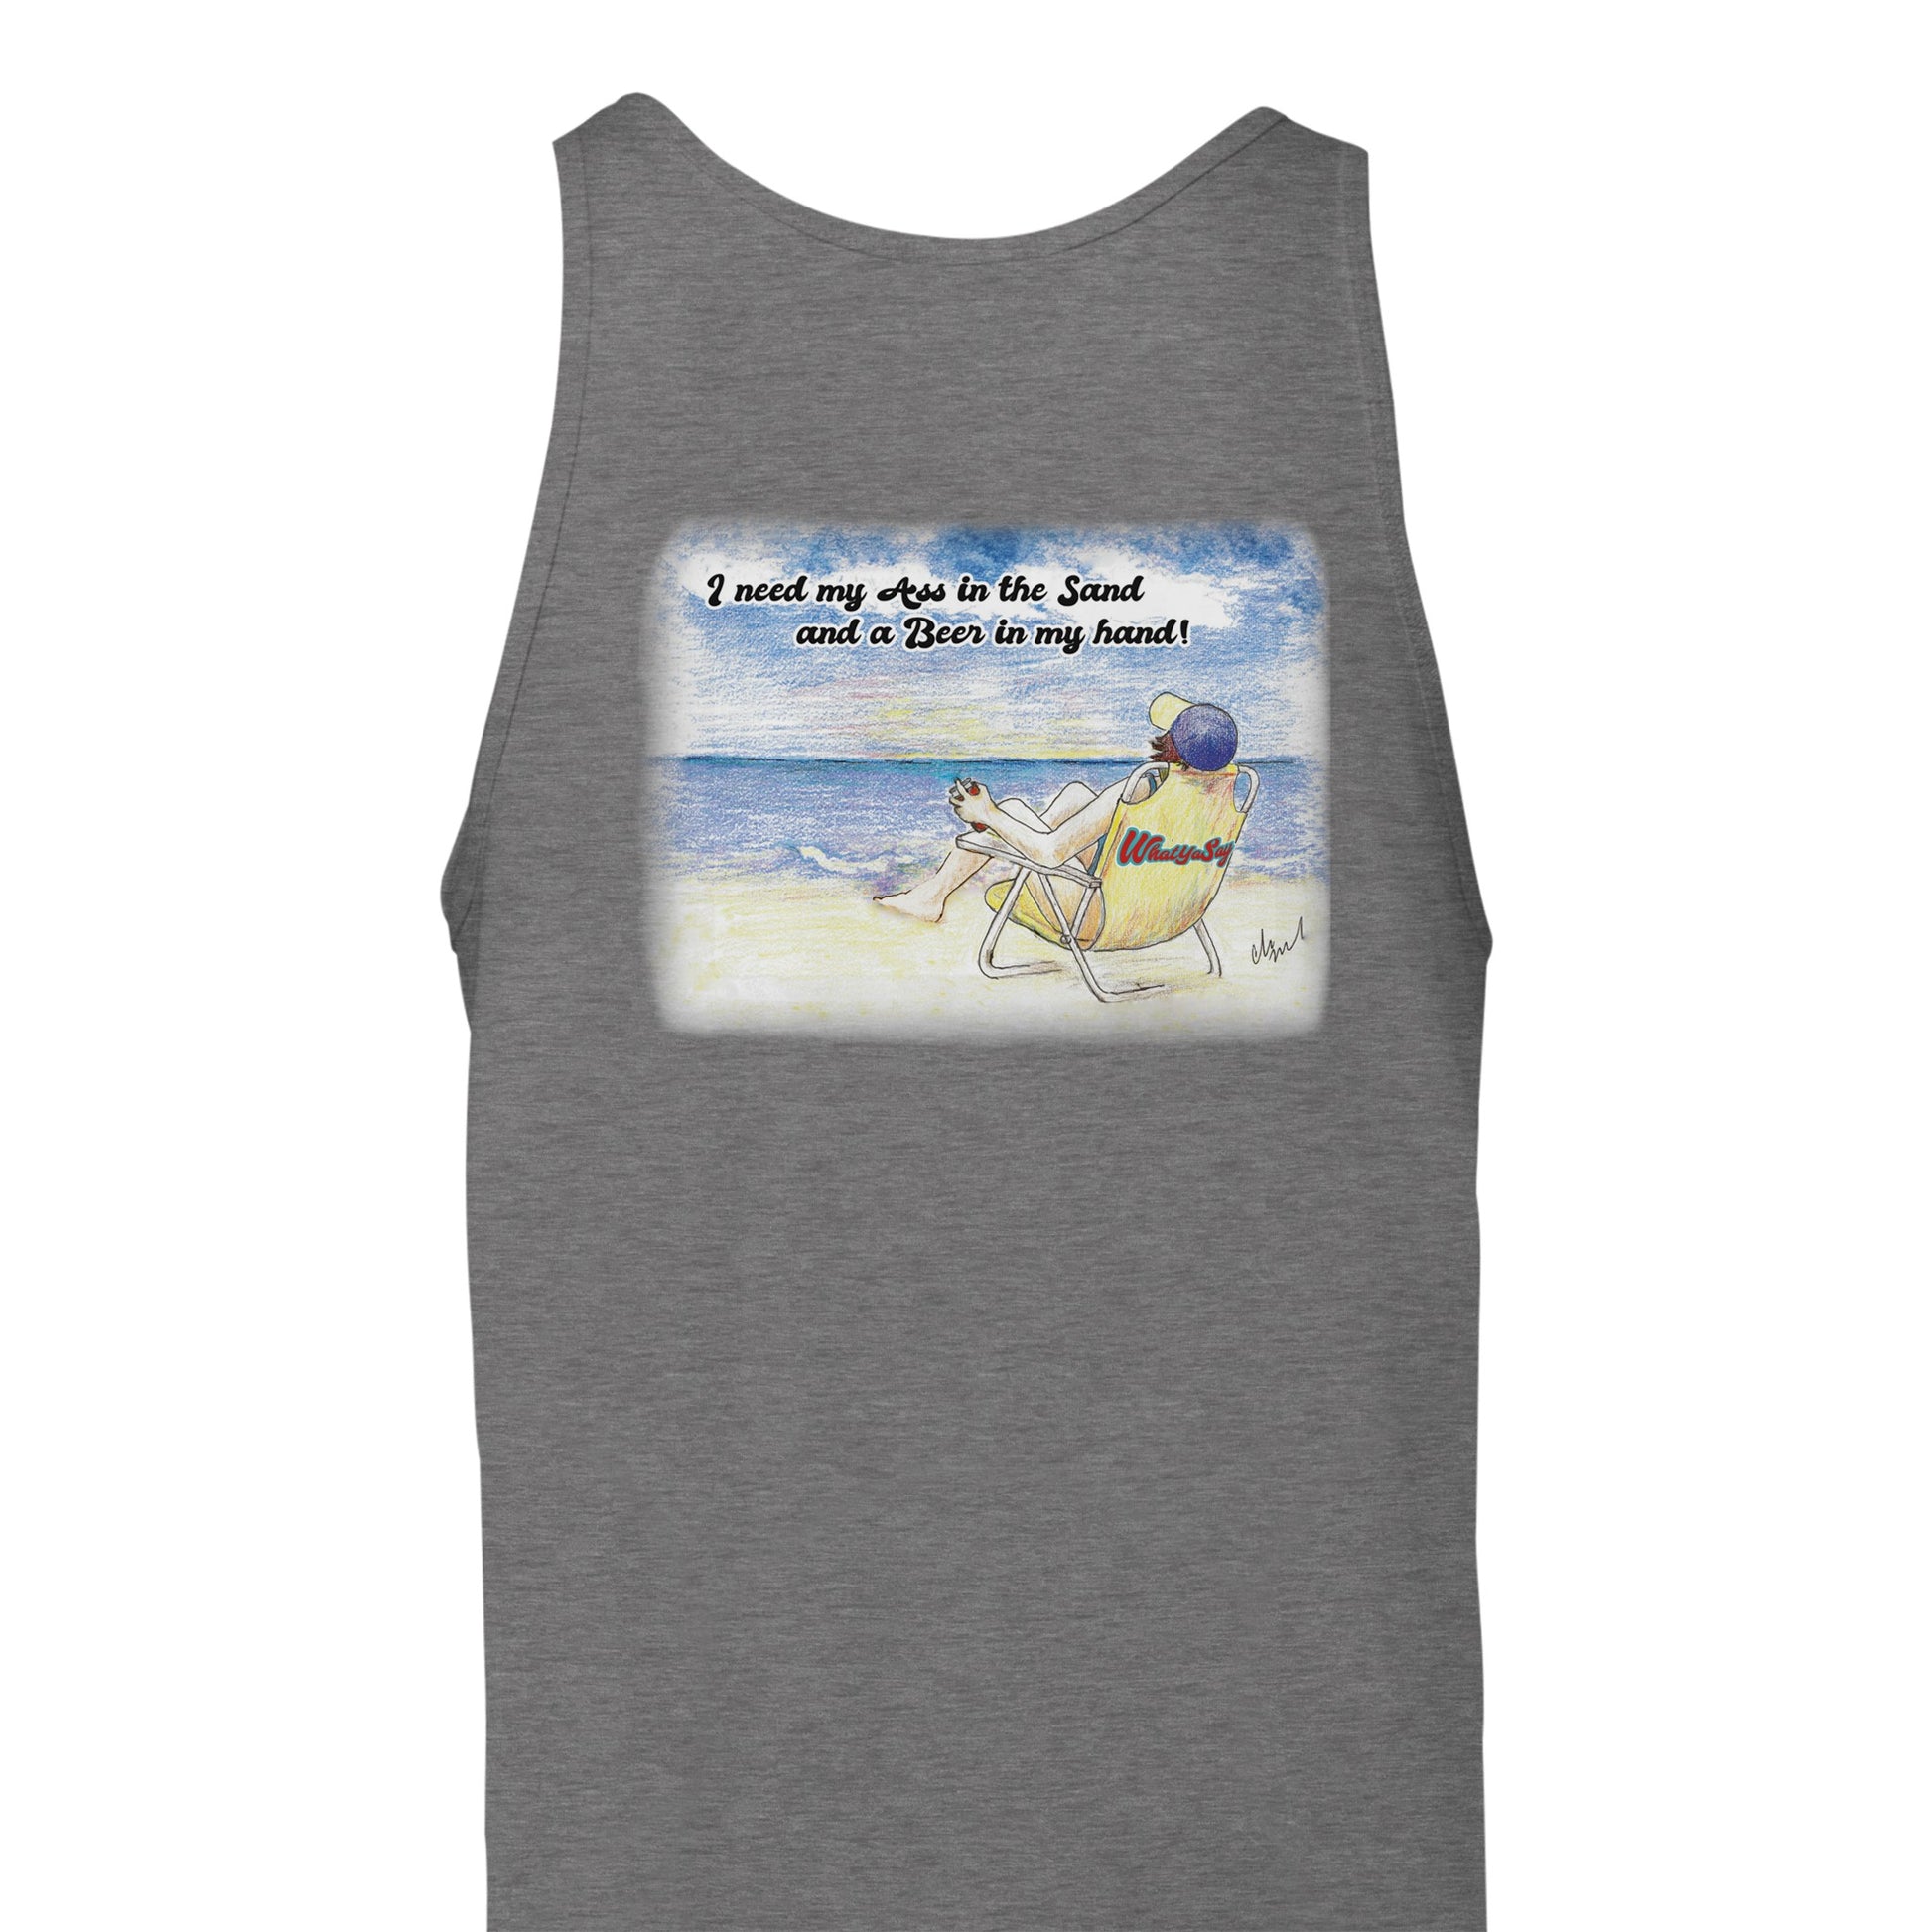 A dark grey heather Premium Unisex Tank Top with original artwork and motto I need my Ass in the Sand and a Beer in my hand on back and WhatYa Say logo on front from combed and ring-spun cotton back view from WhatYa Say Apparel.